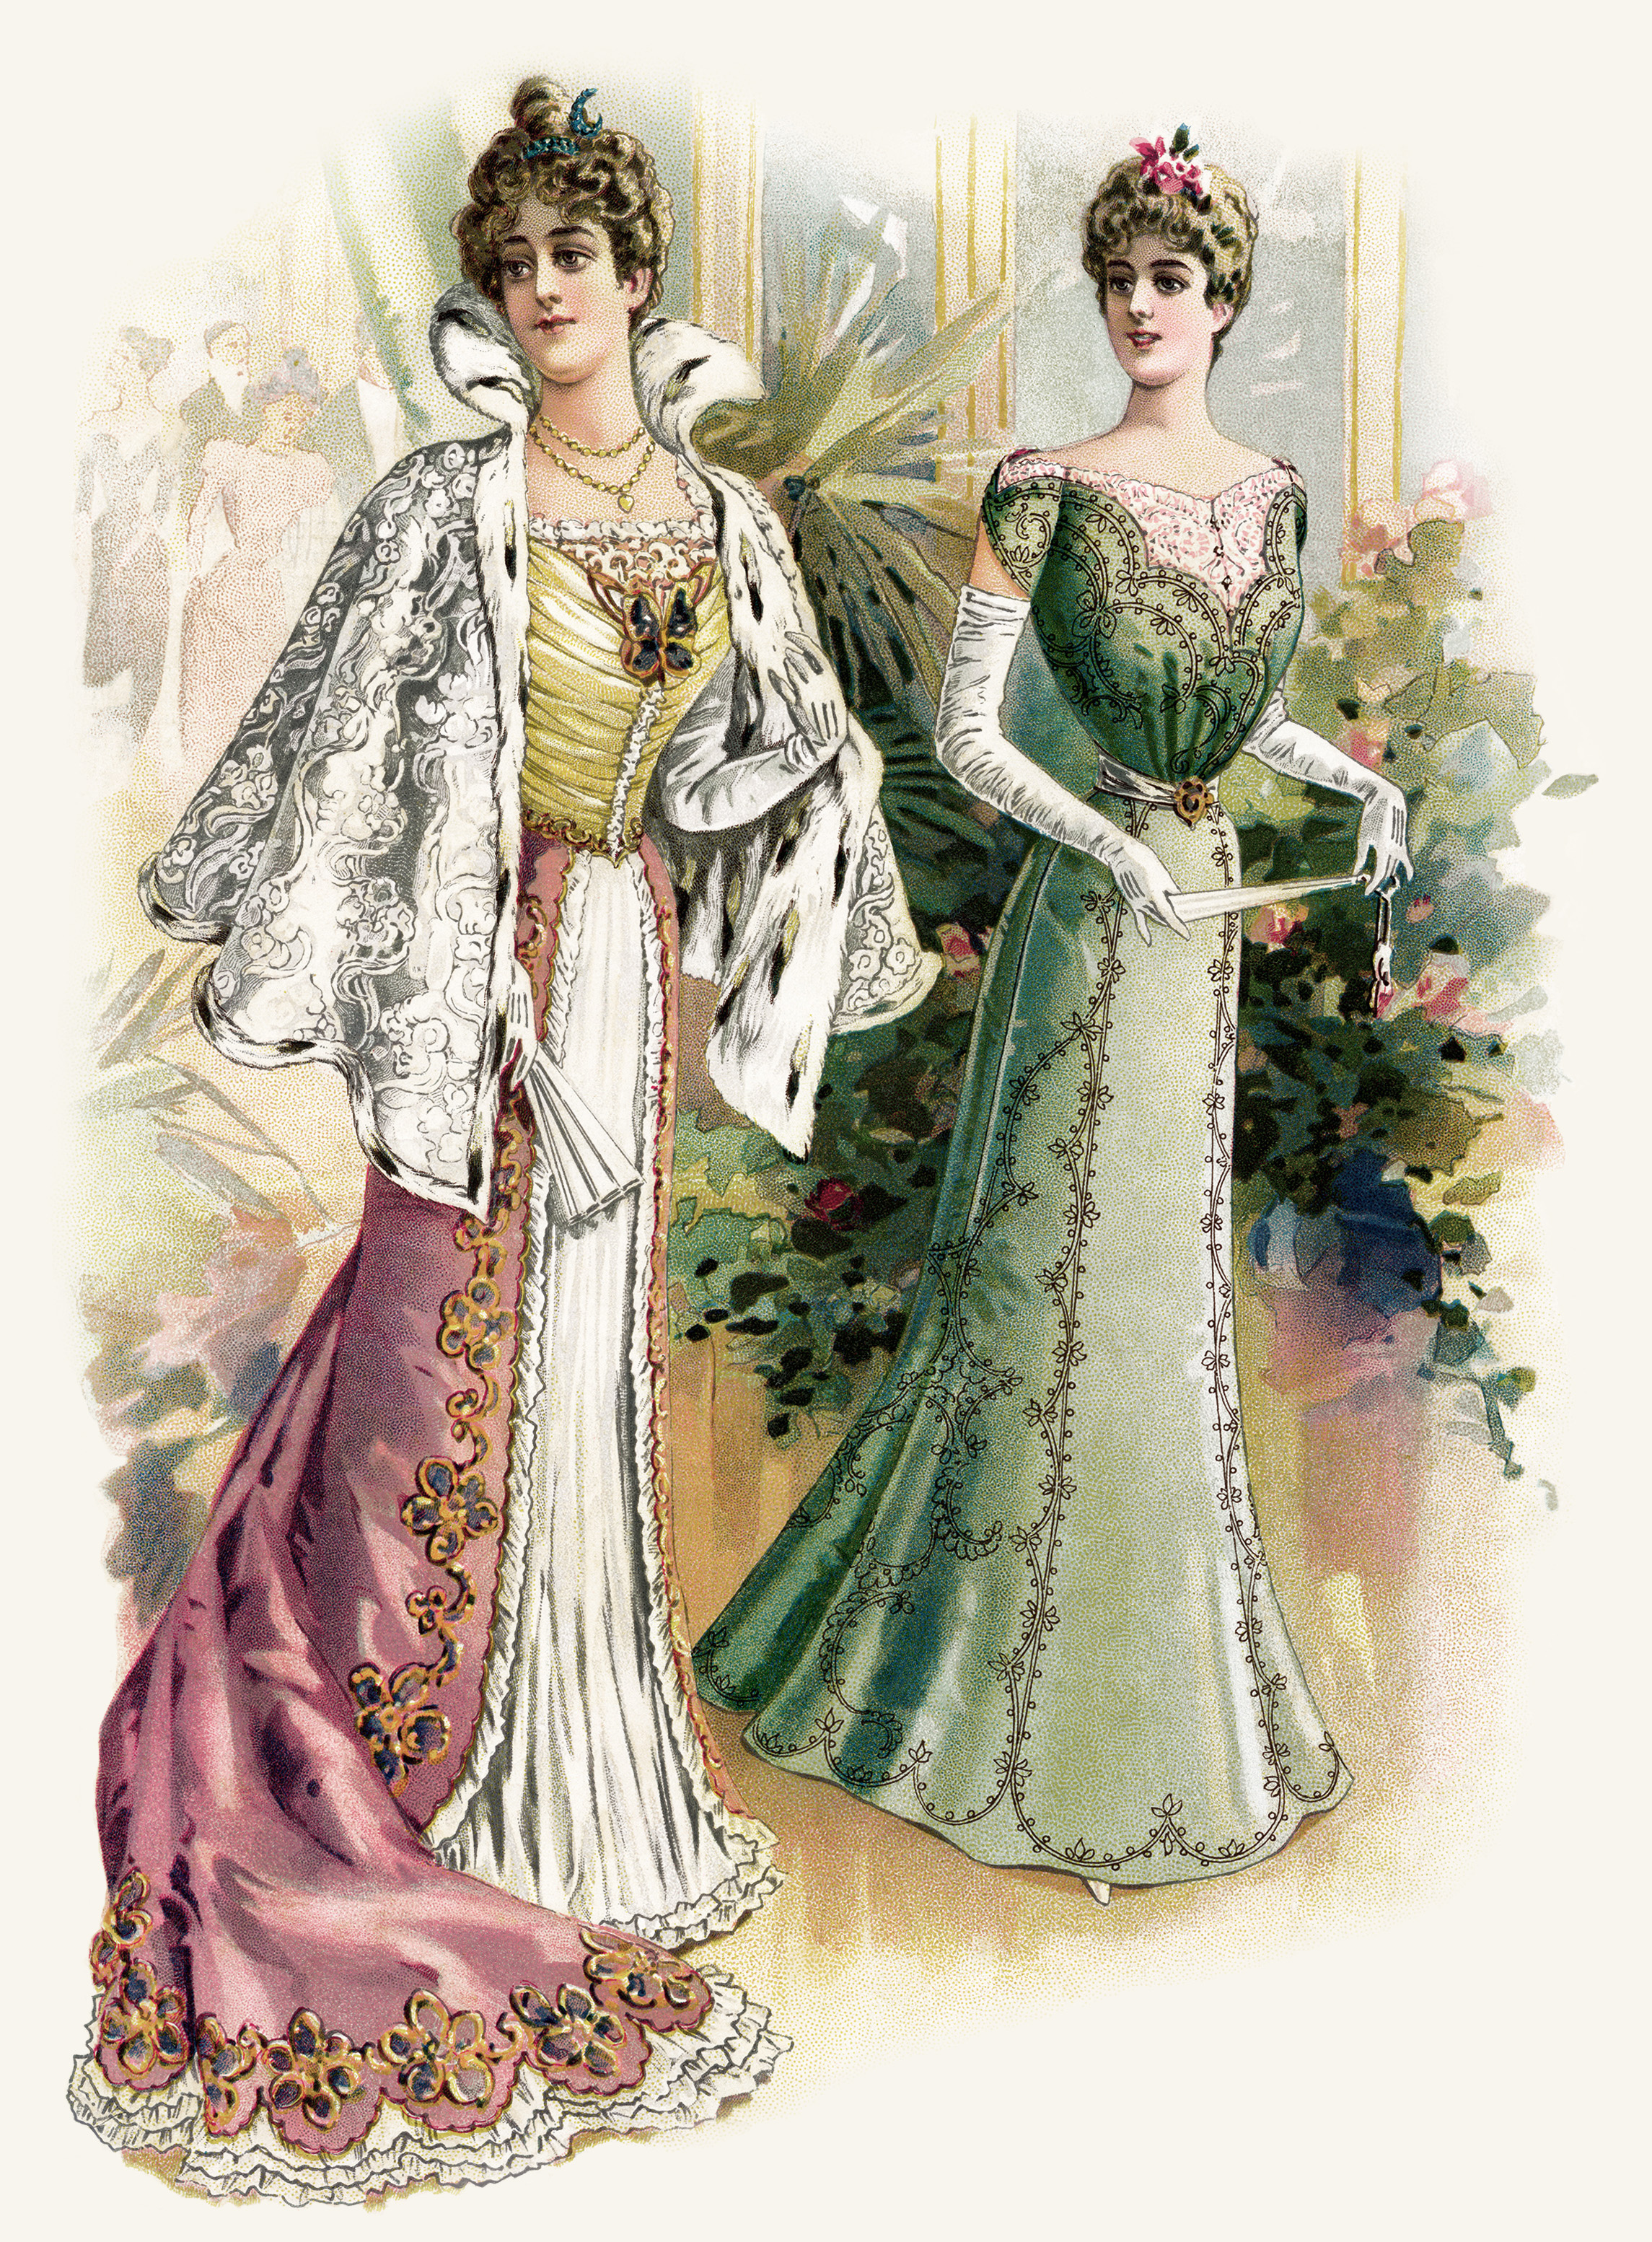 Victorian fashion plate, Victorian lady clip art, antique womans dress, vintage ball gown illustration, elegant formal Victorian party